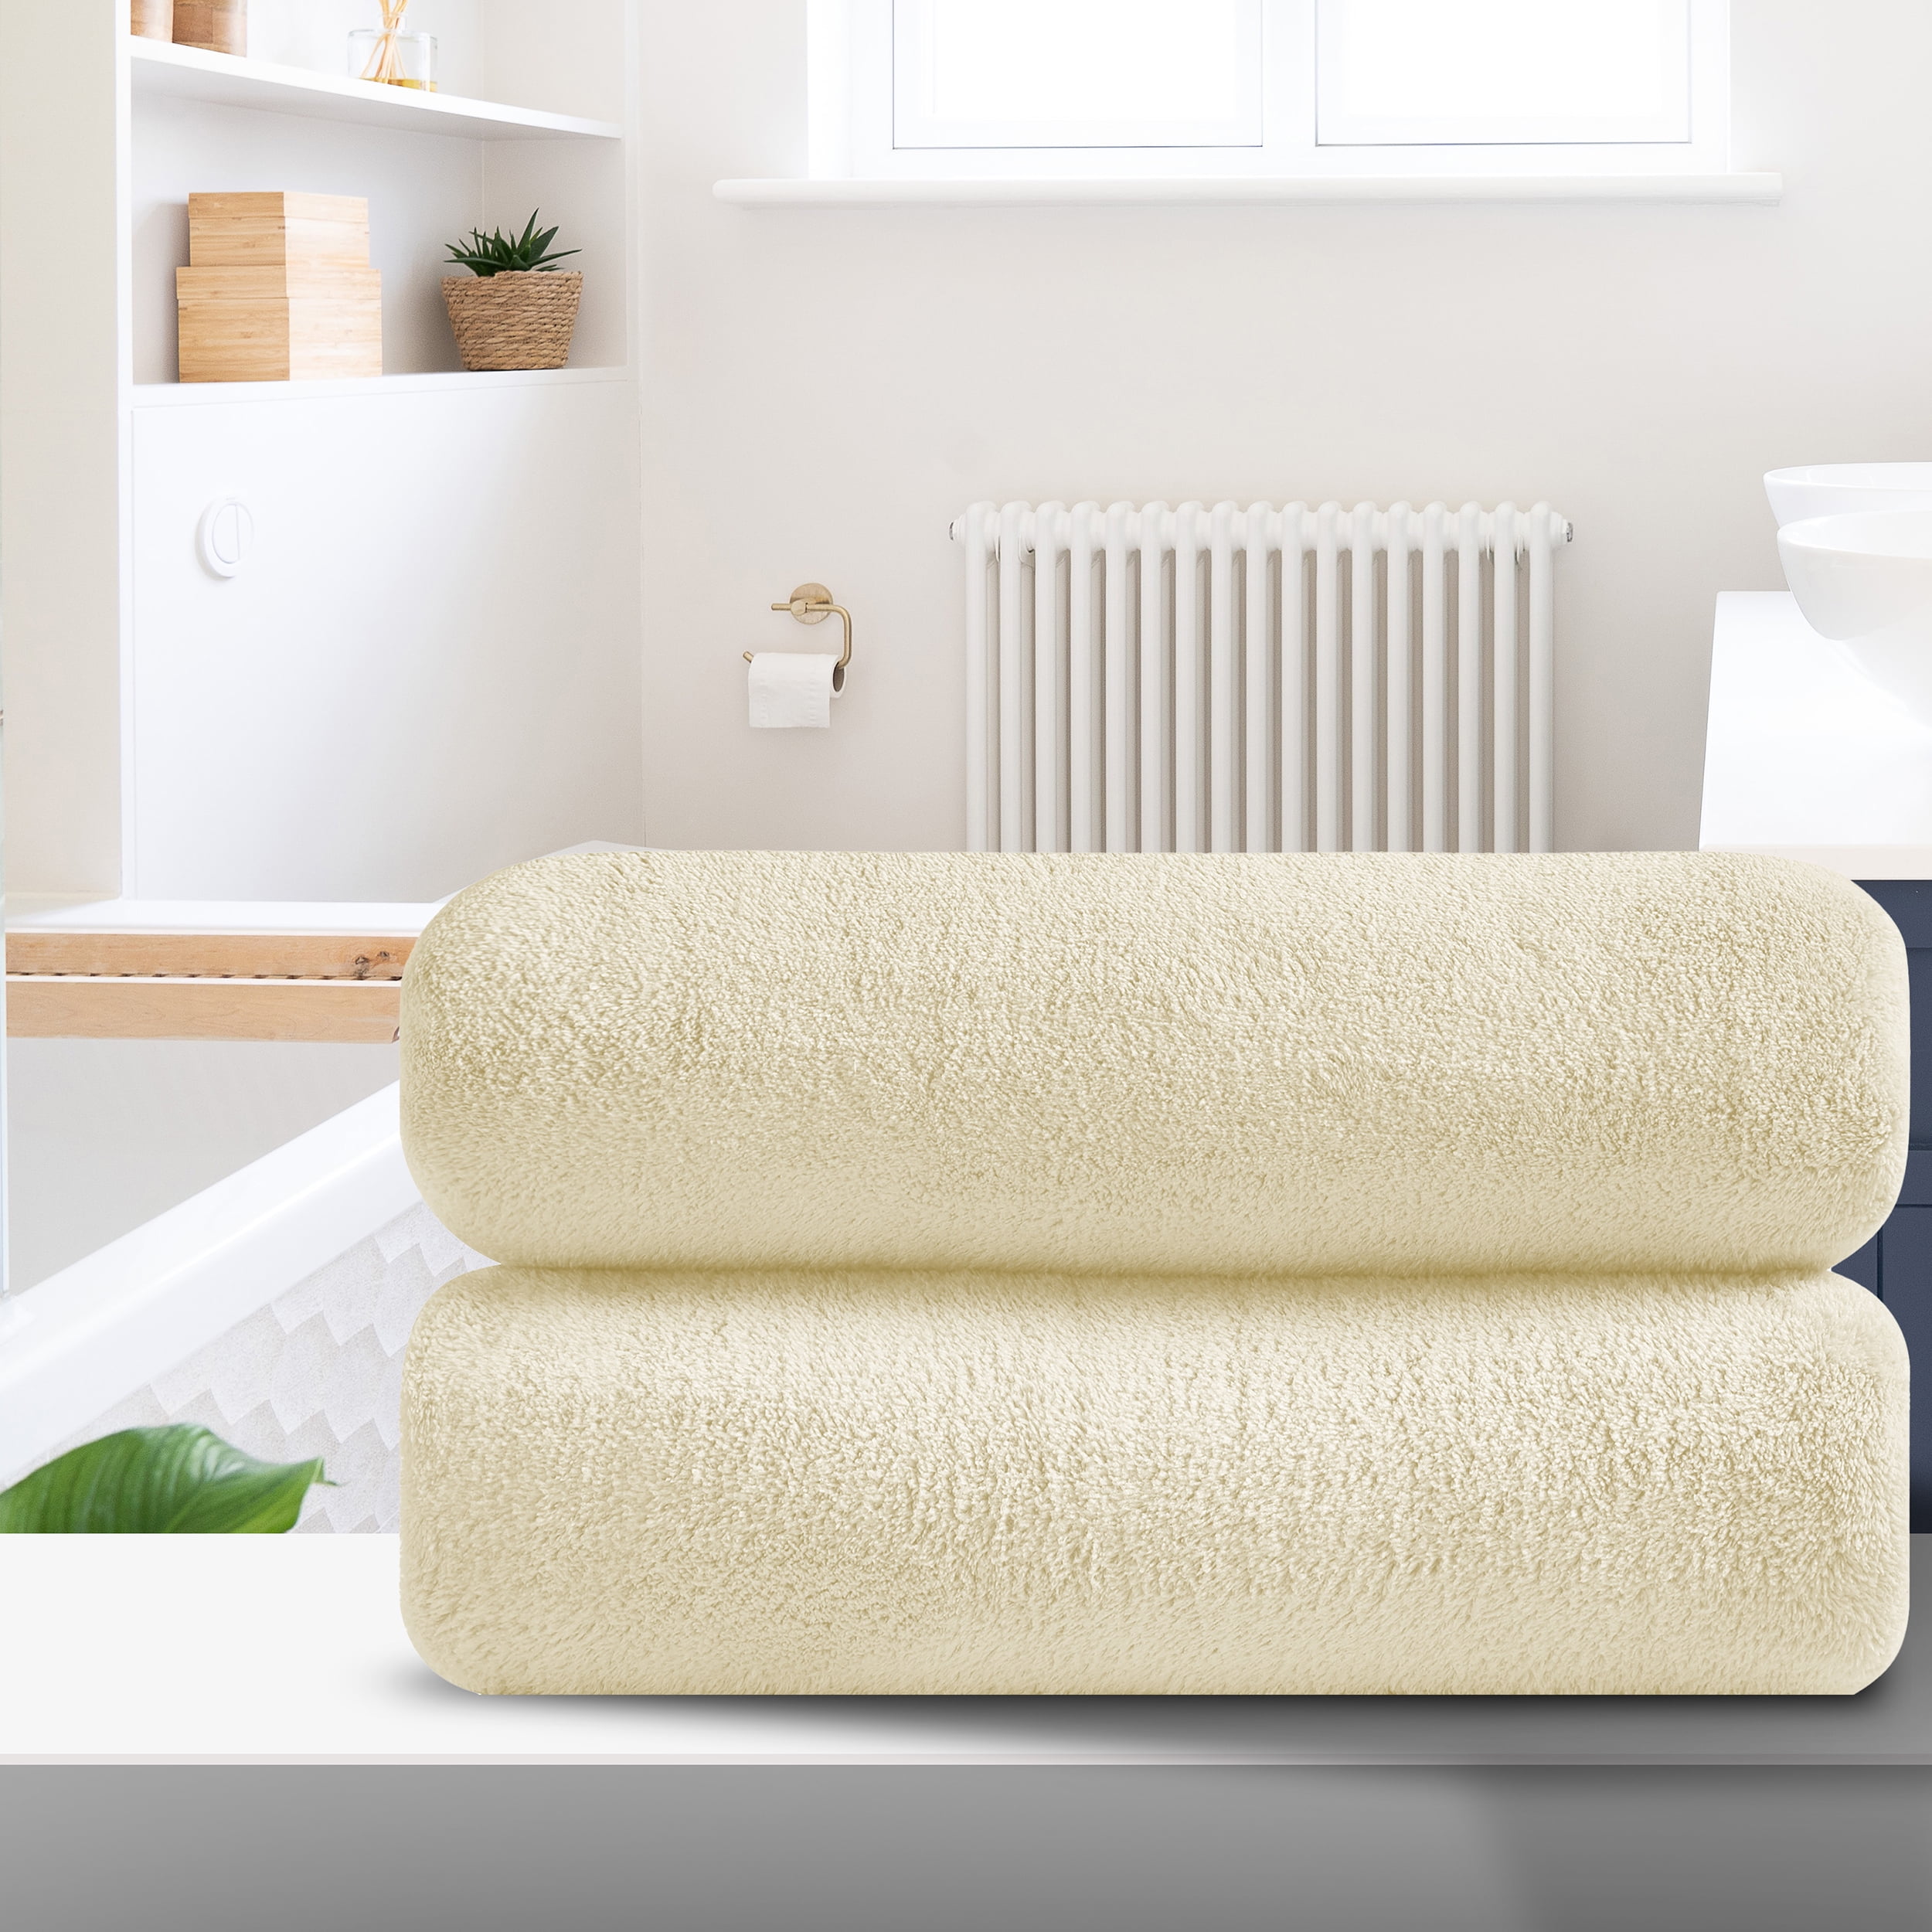 Smuge 2 Pack Oversized Bath Sheet Towels (35 x 70 in,Cream) 700